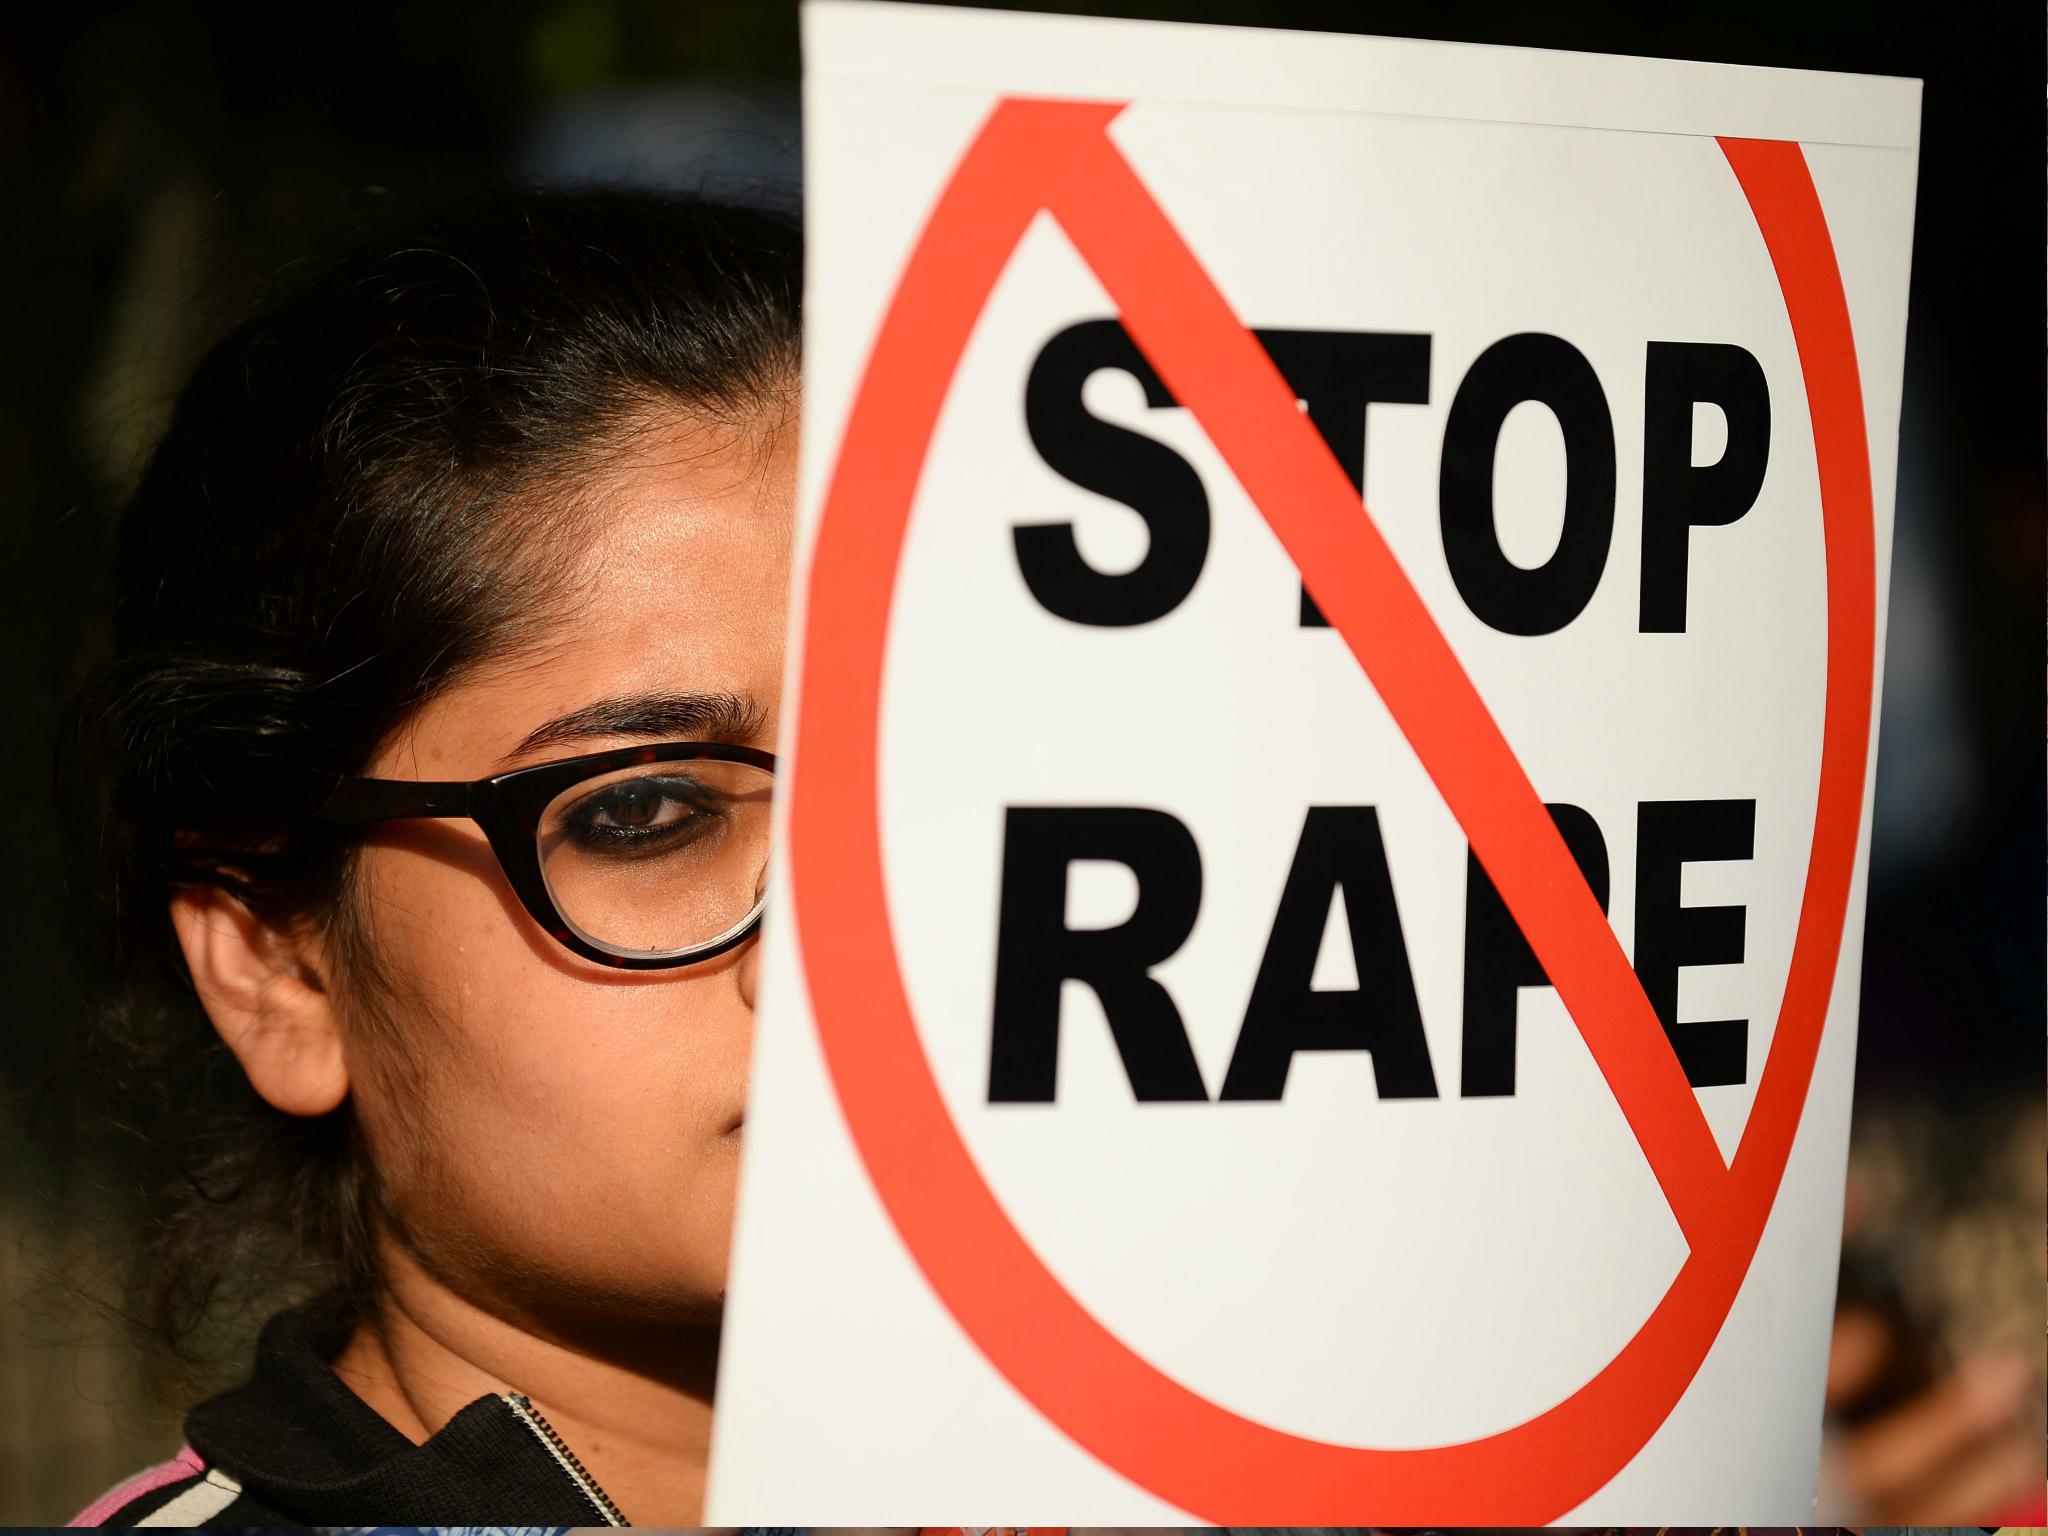 An Indian social activist holds a placard during a protest against a rape at Hauz Khas village in New Delhi on 21 February 2017.